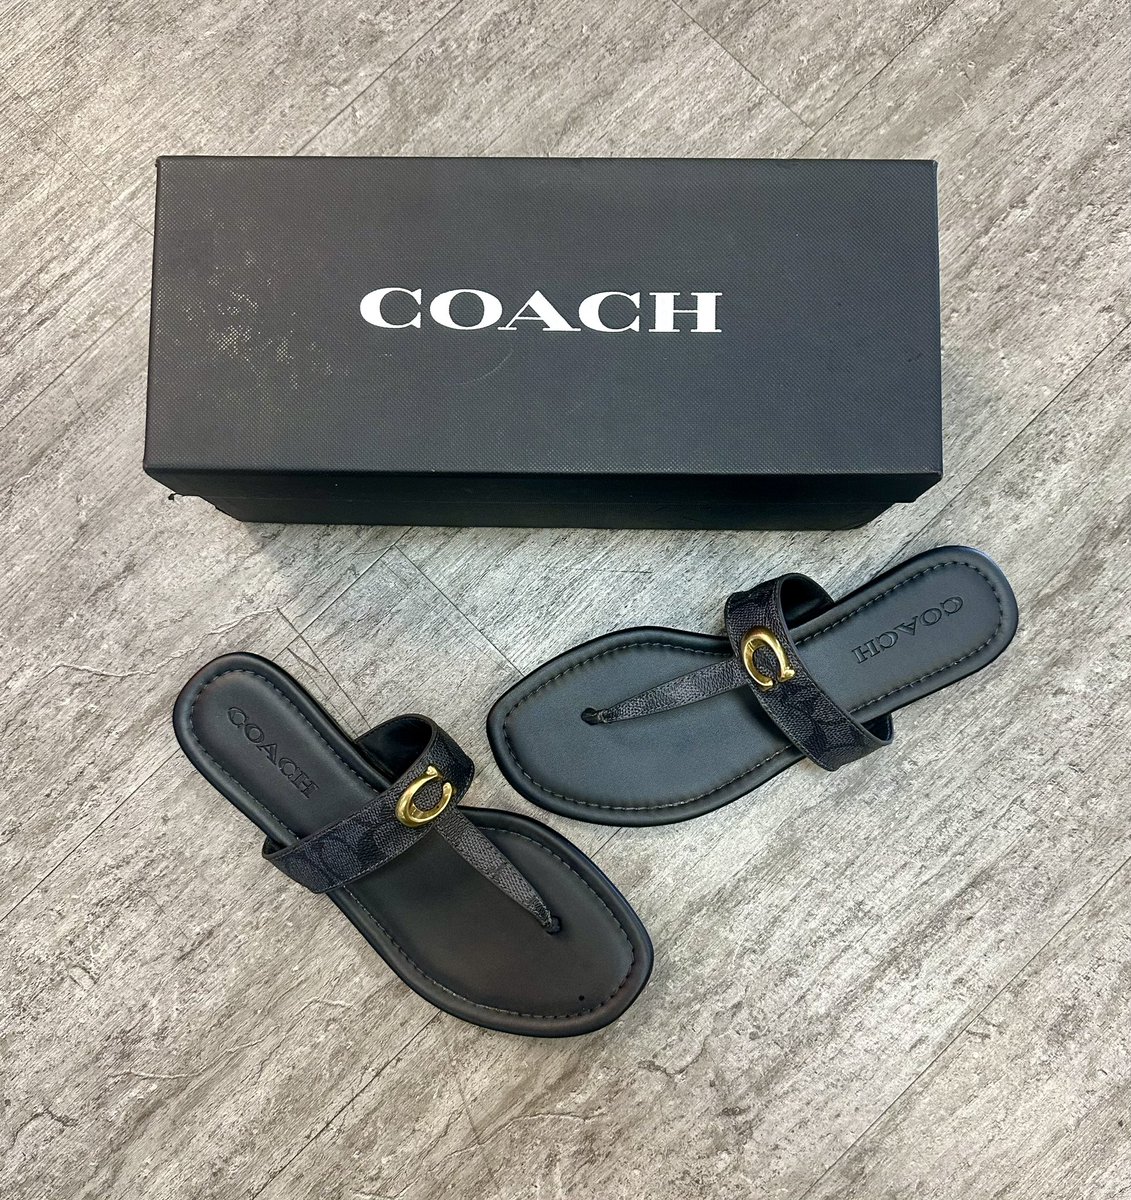 Coach Sandals 🌱 We have lots of clothing priced
 $4-$10 as well! BUY SELL TRADE! #namebrandexchange #shoes #sandals #summer #style #recycle #used #sustainability #leather #trends #usedleather #secondhand #fashion #mesa #mesaaz #arizona #recycledfashion